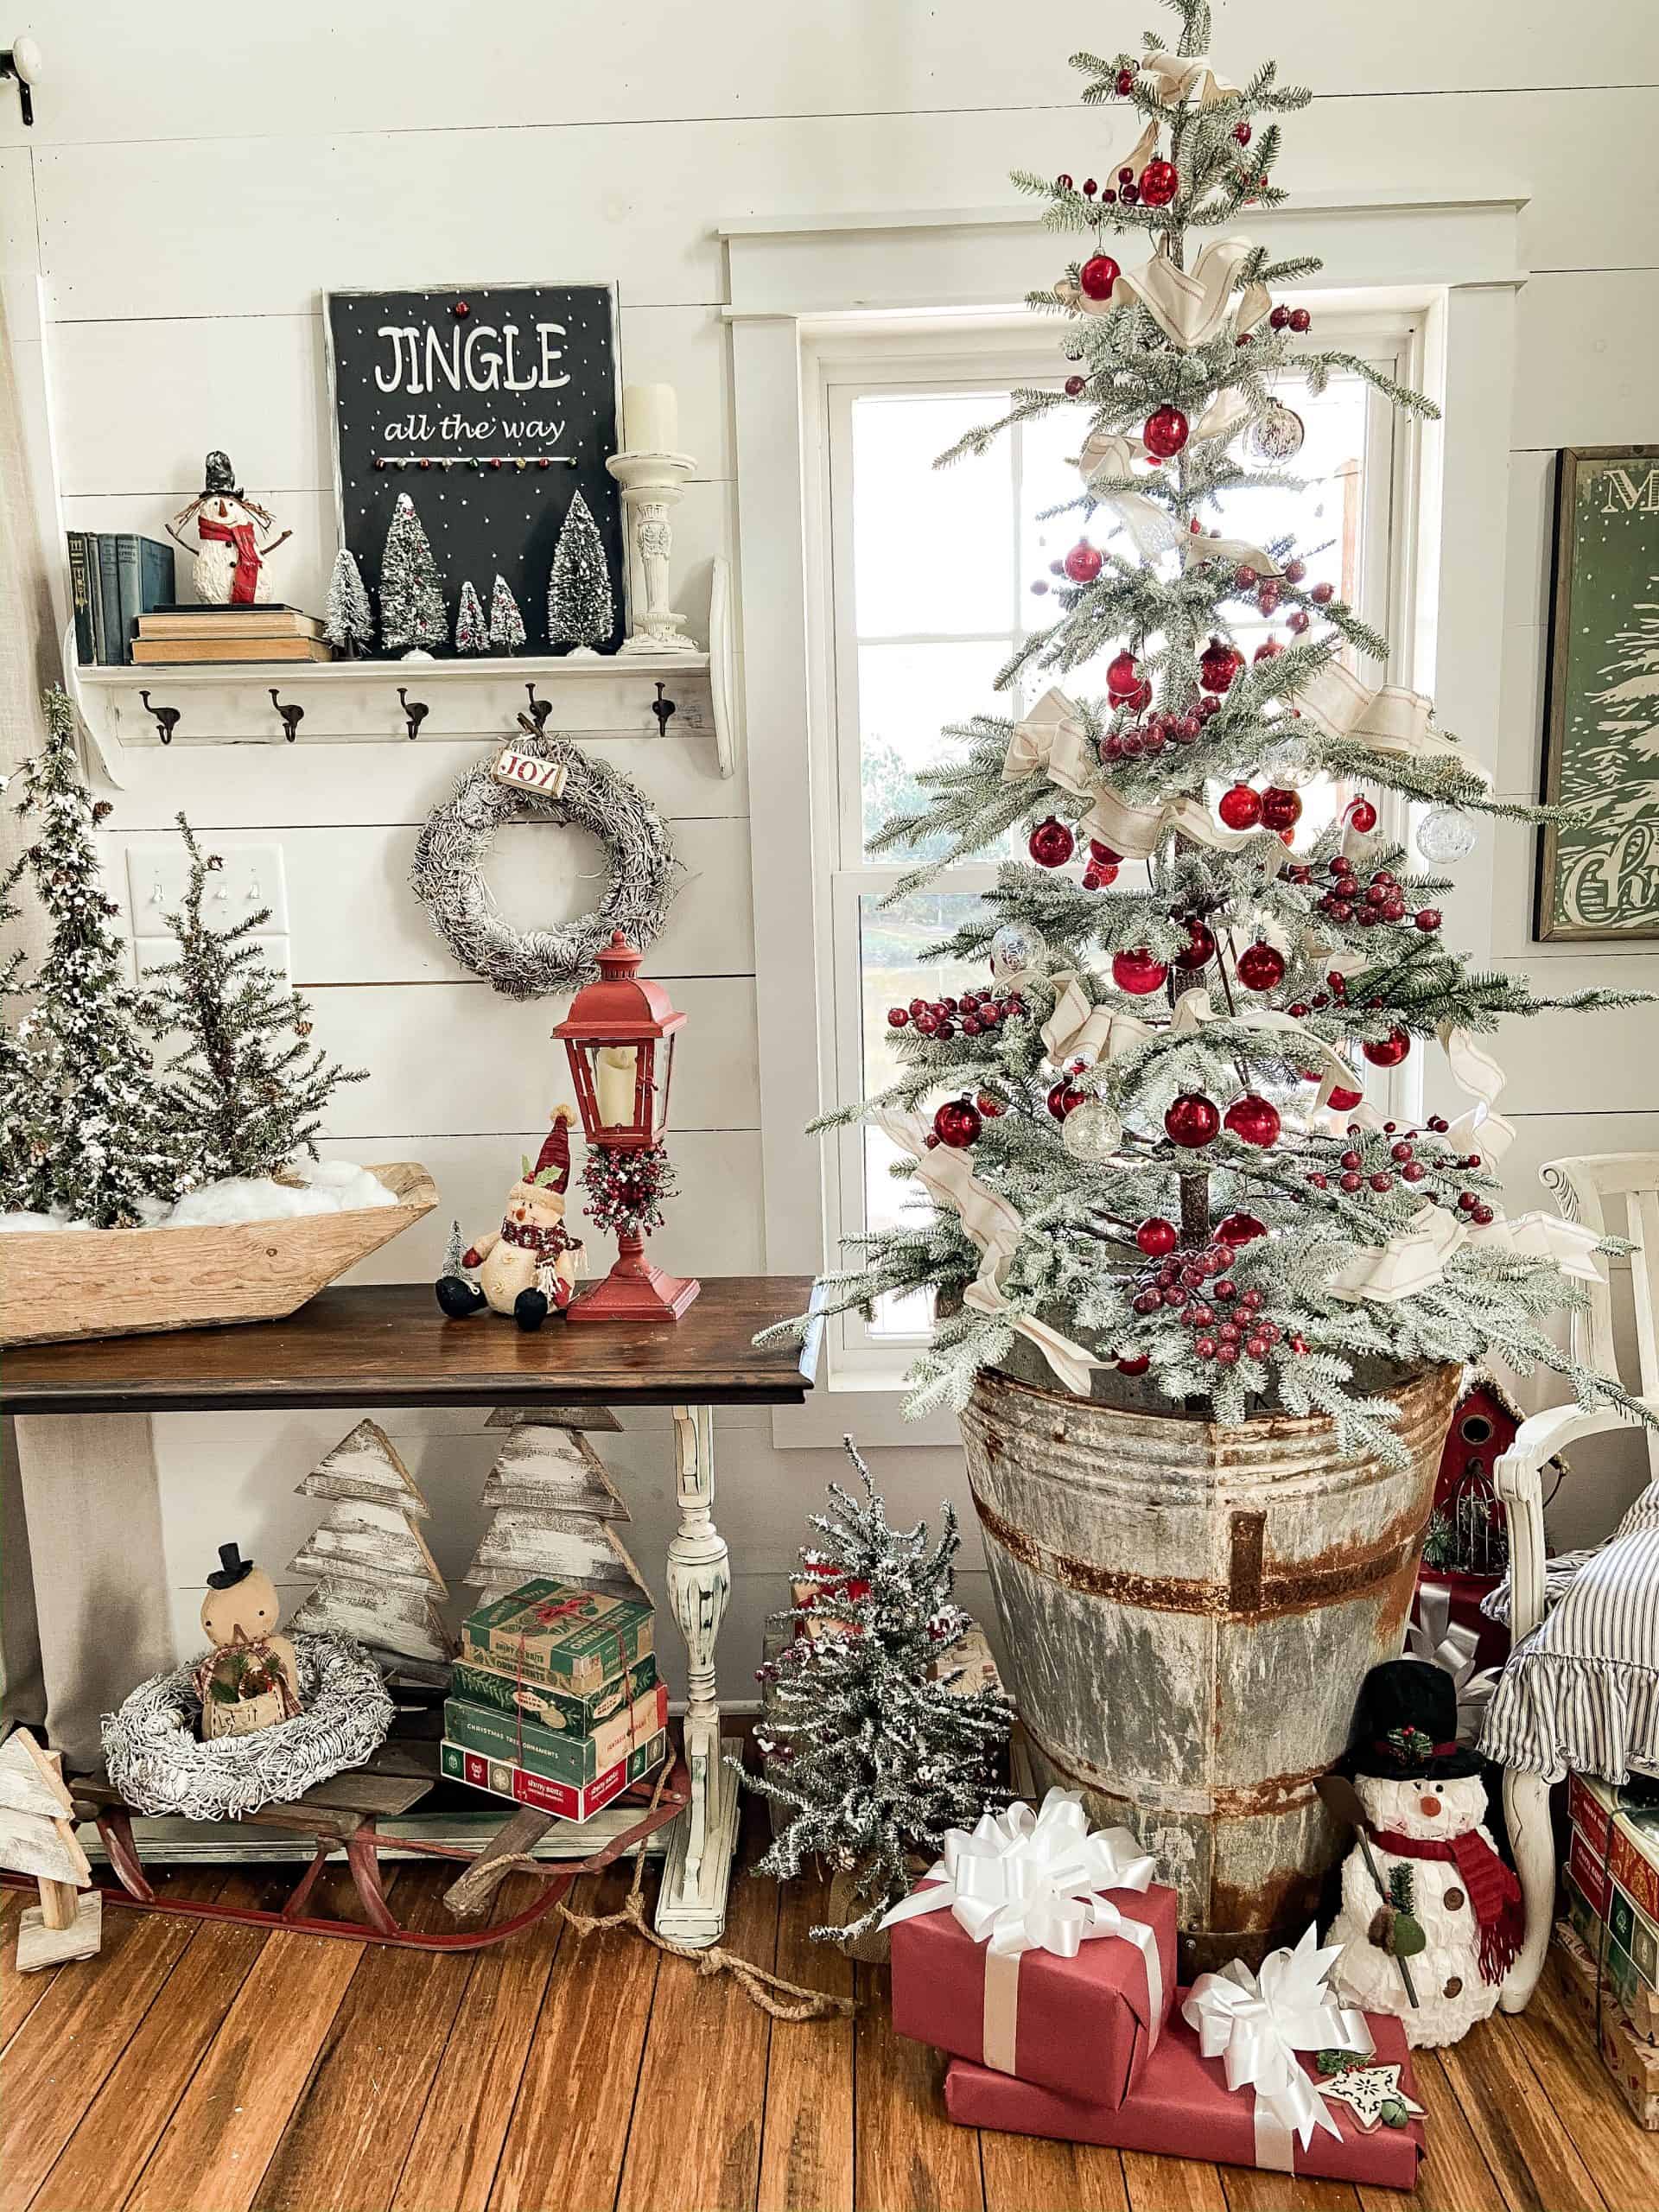 15 DIY Christmas Decorations-Christmas In July - The Ponds Farmhouse